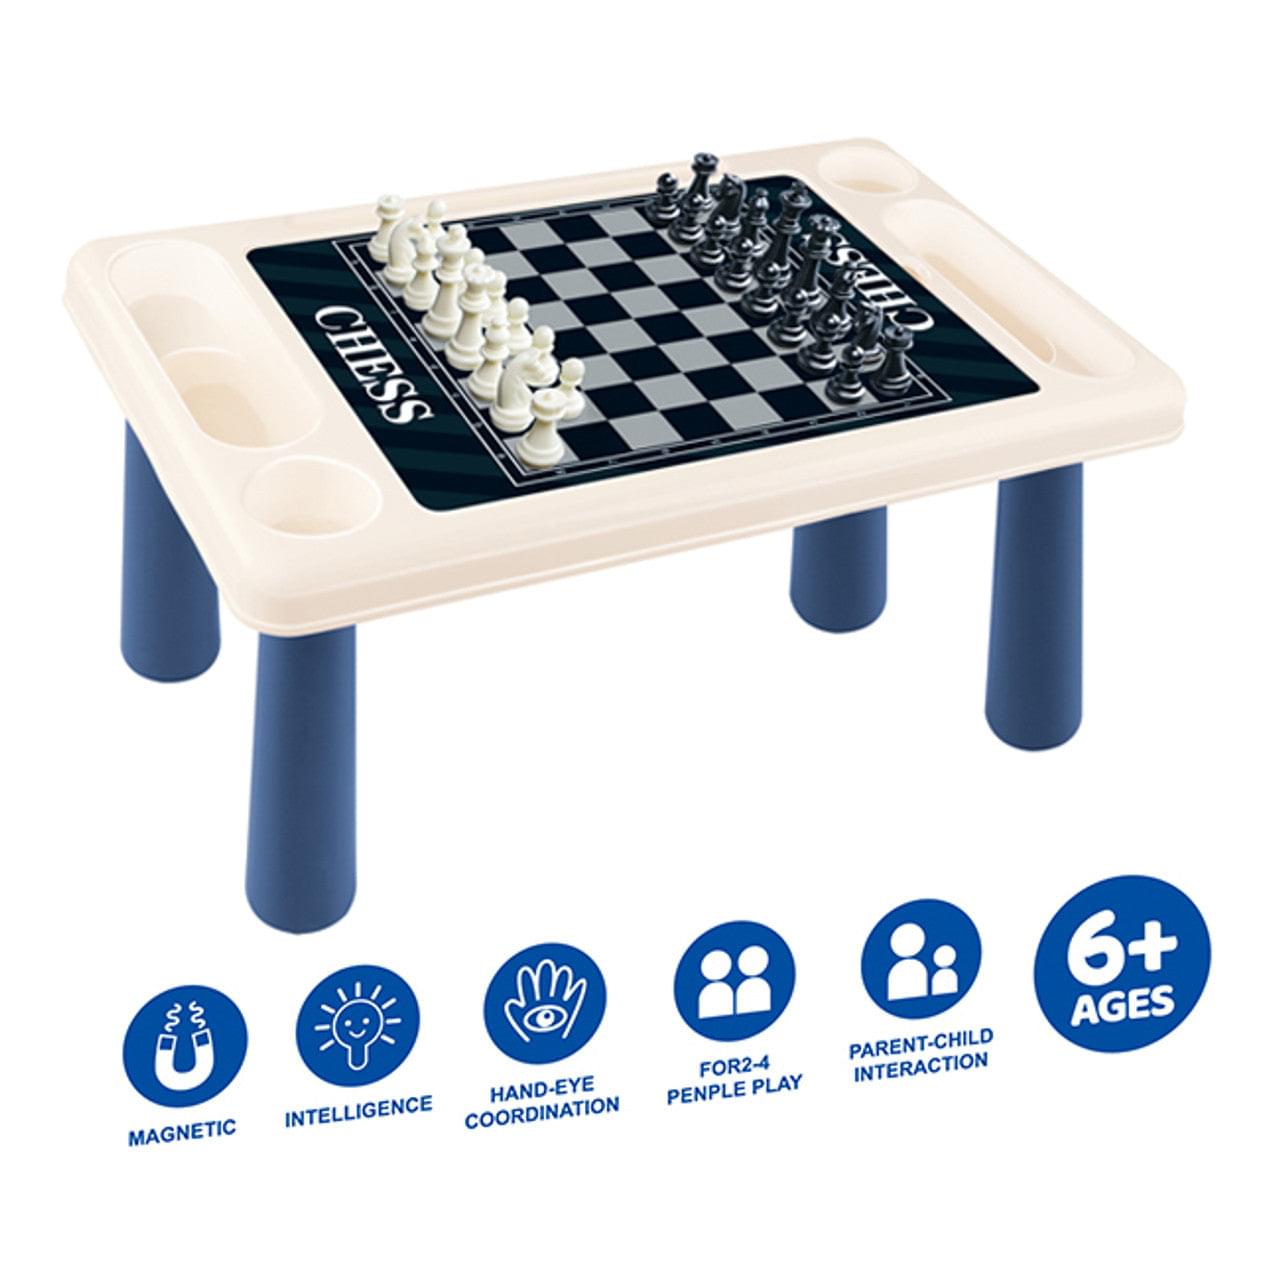 9 IN 1 CHESS TABLE-S5512